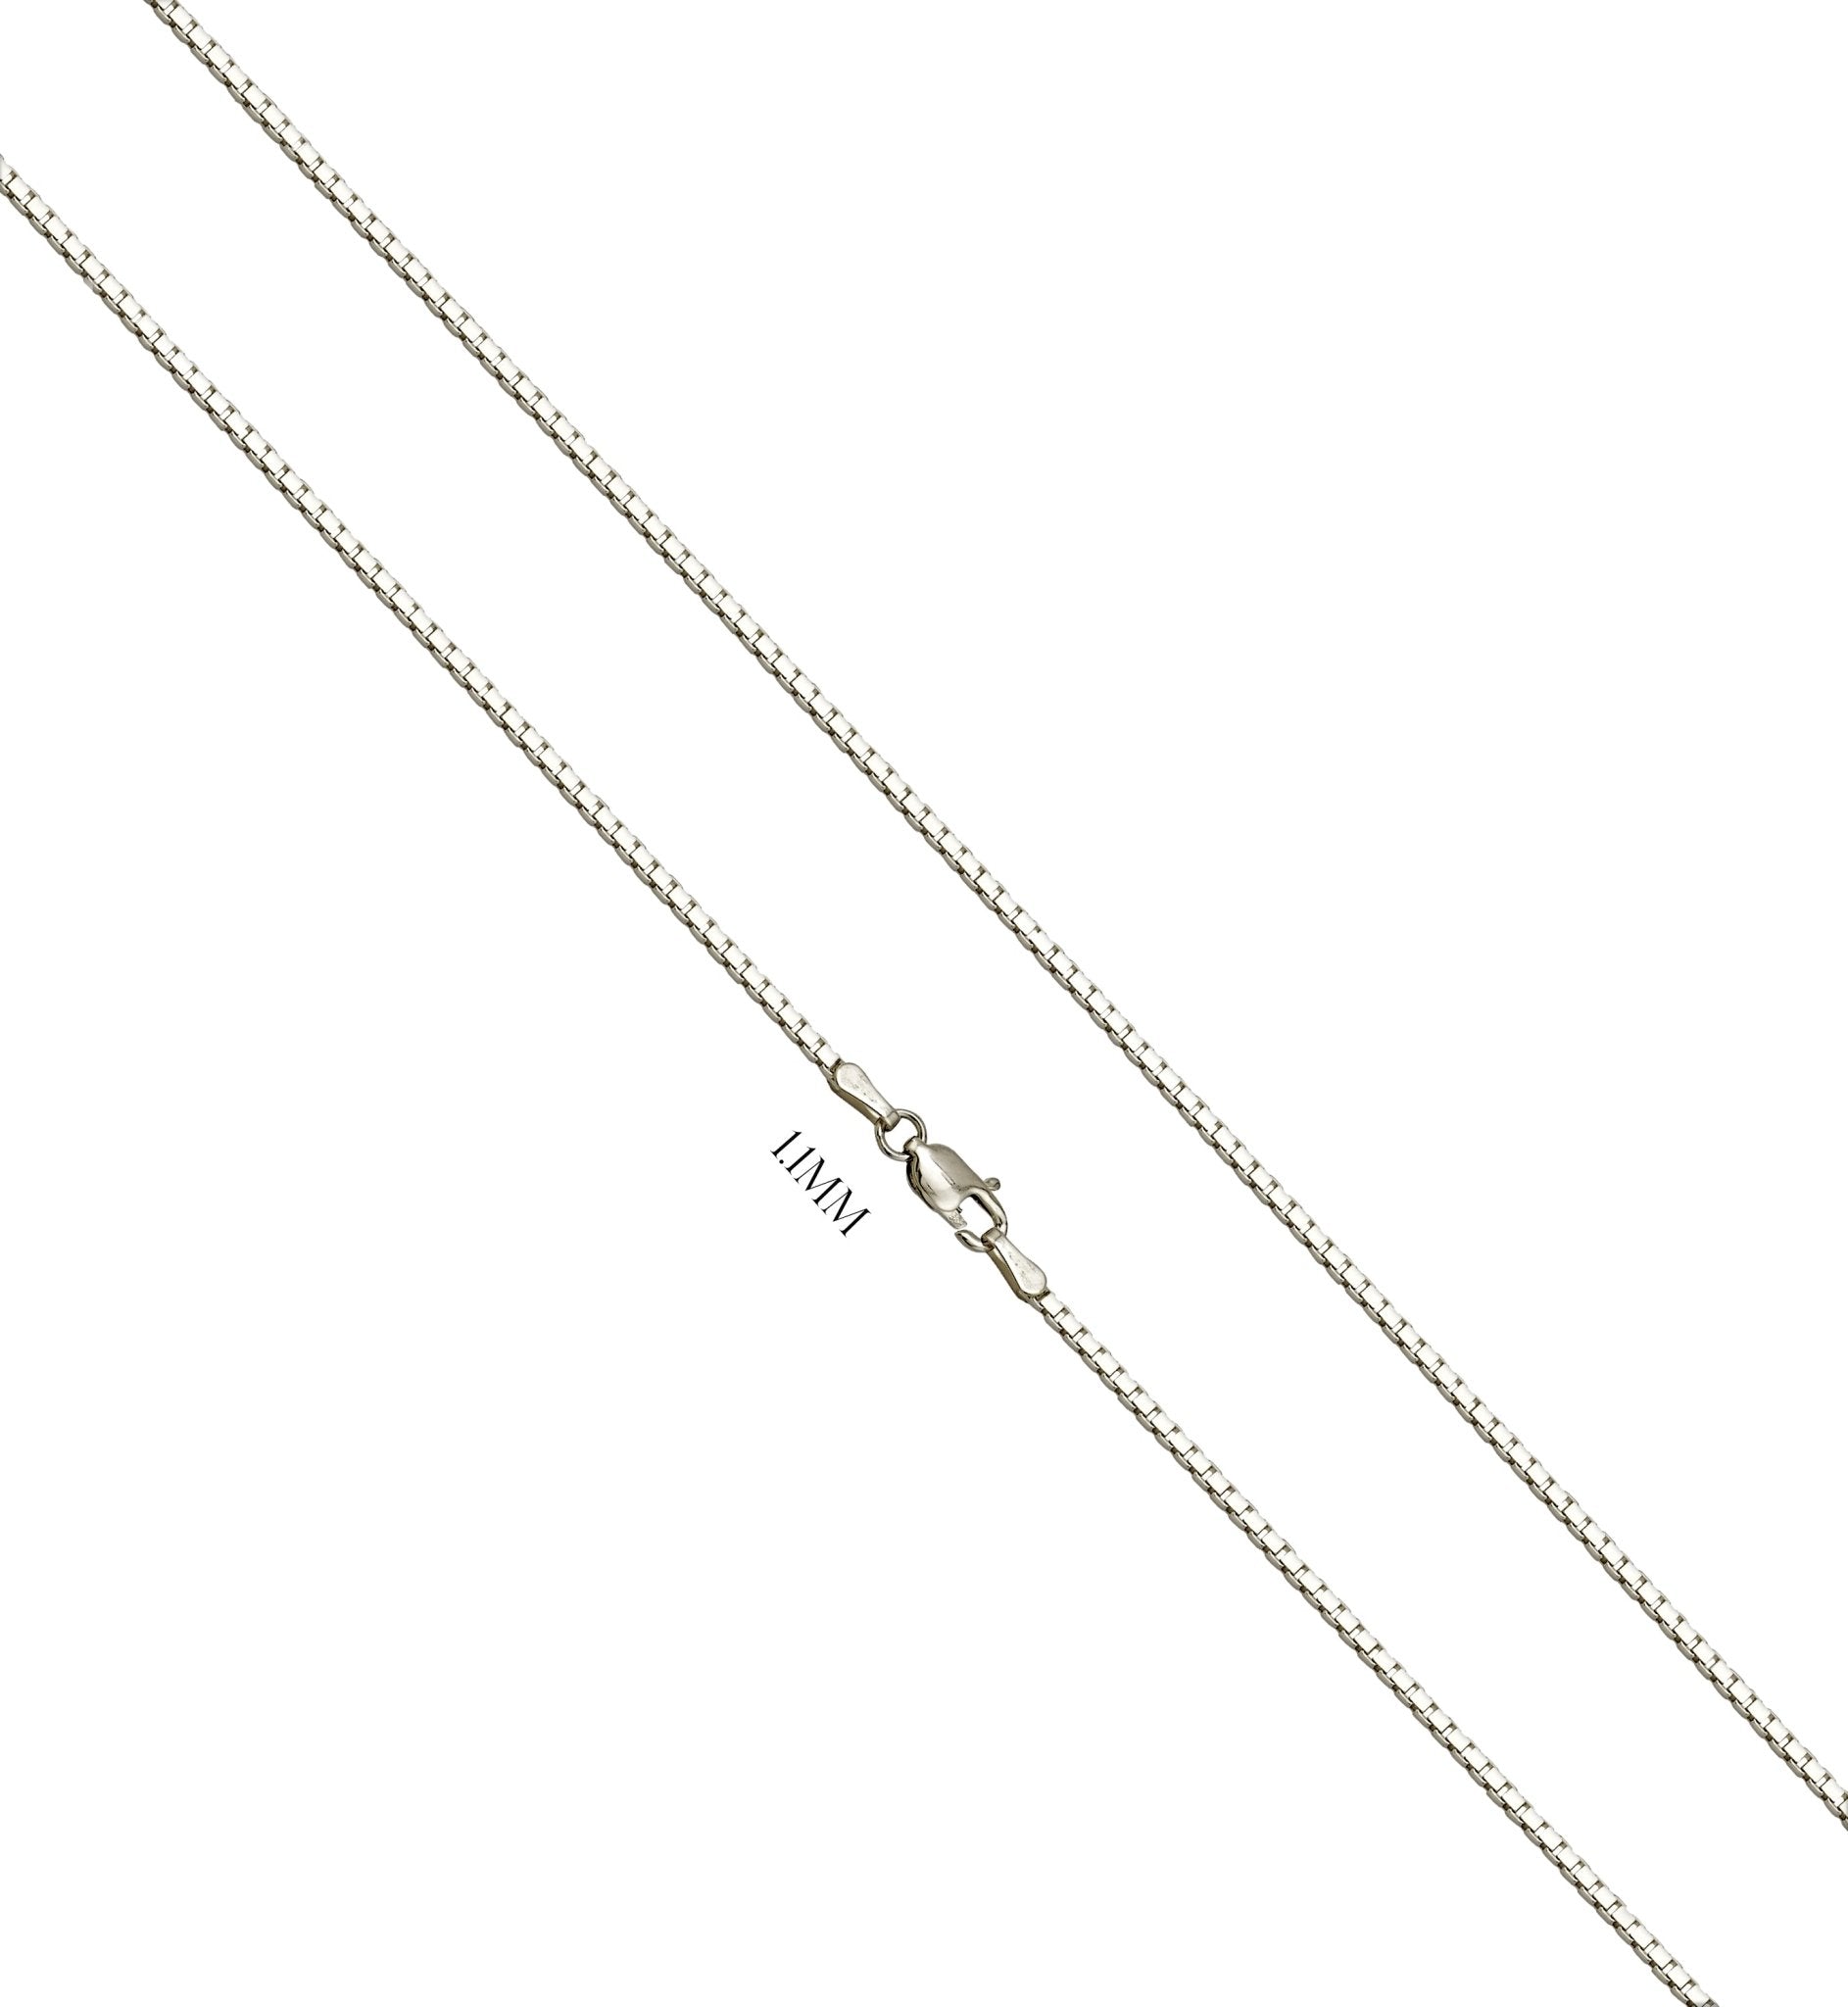 Women's 14K Gold Necklace Solid White Gold Rope Chain RPDS/14WHWM - ItsHot